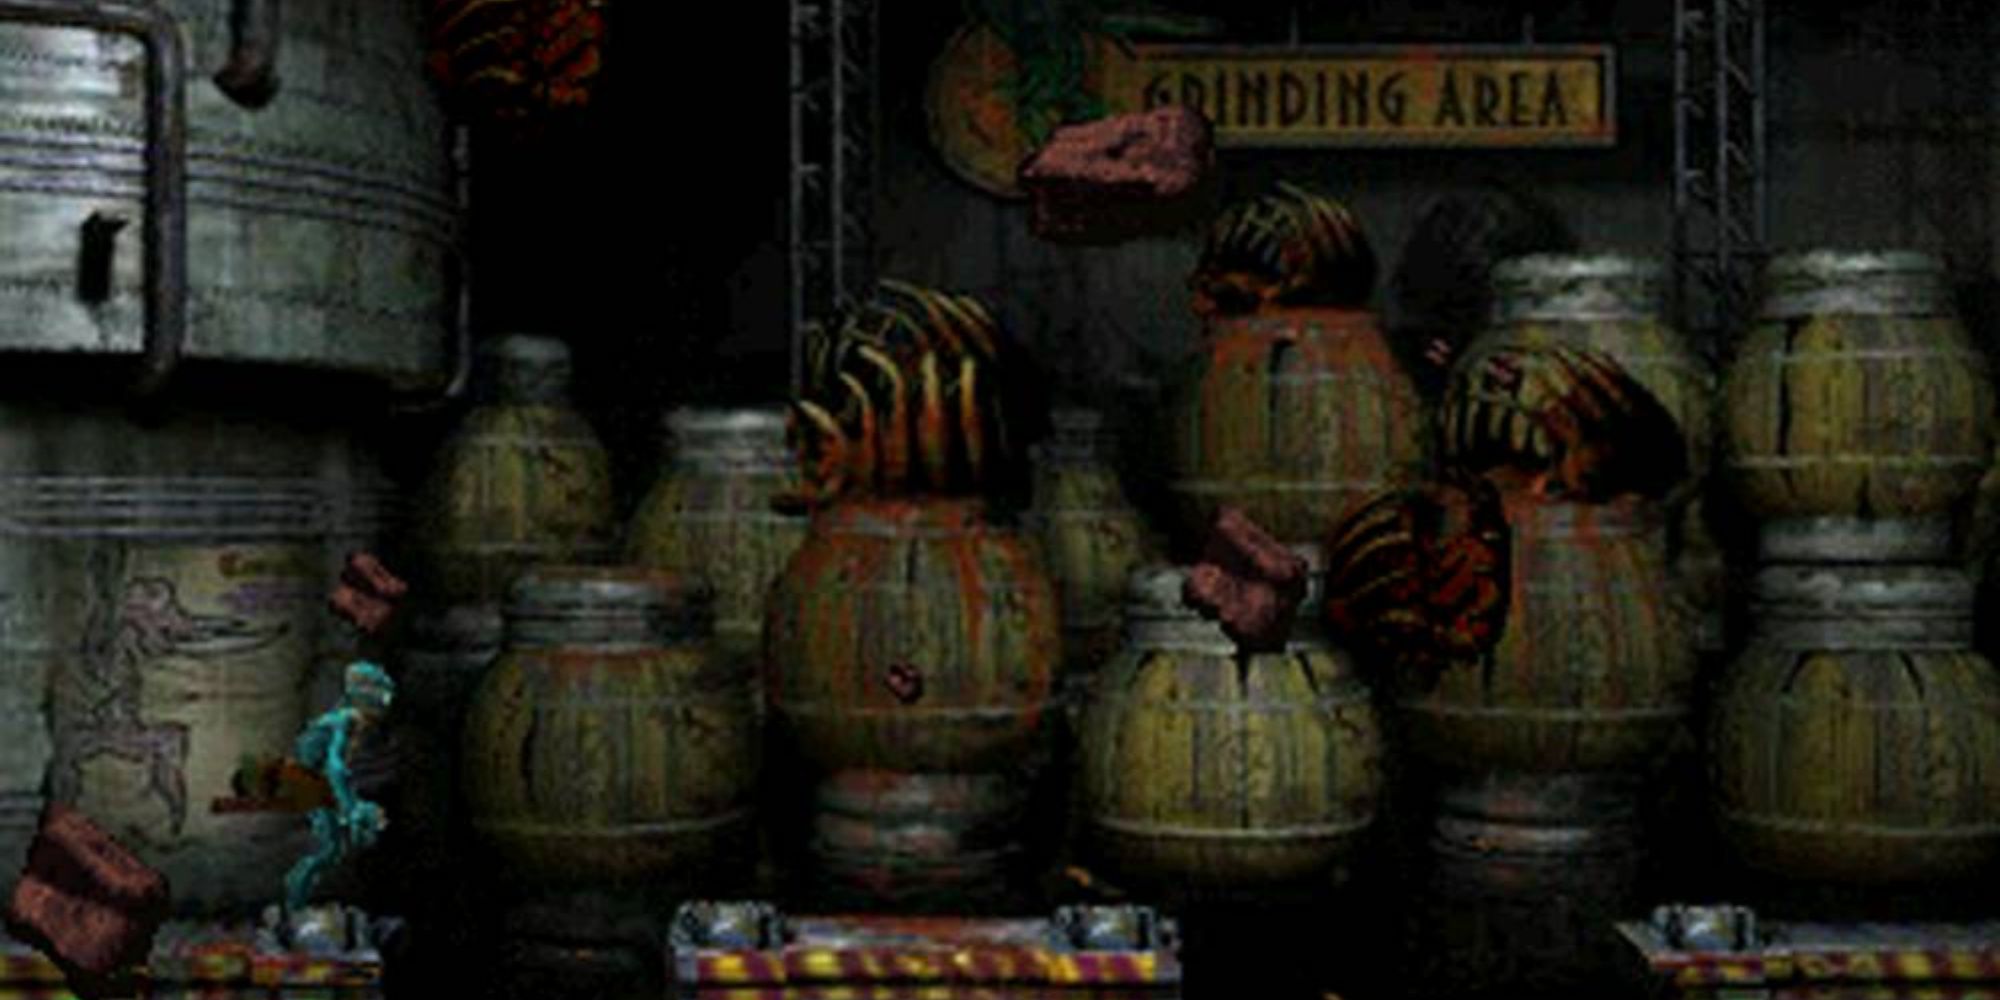 Exploring a level in Oddworld Abe's Oddysee